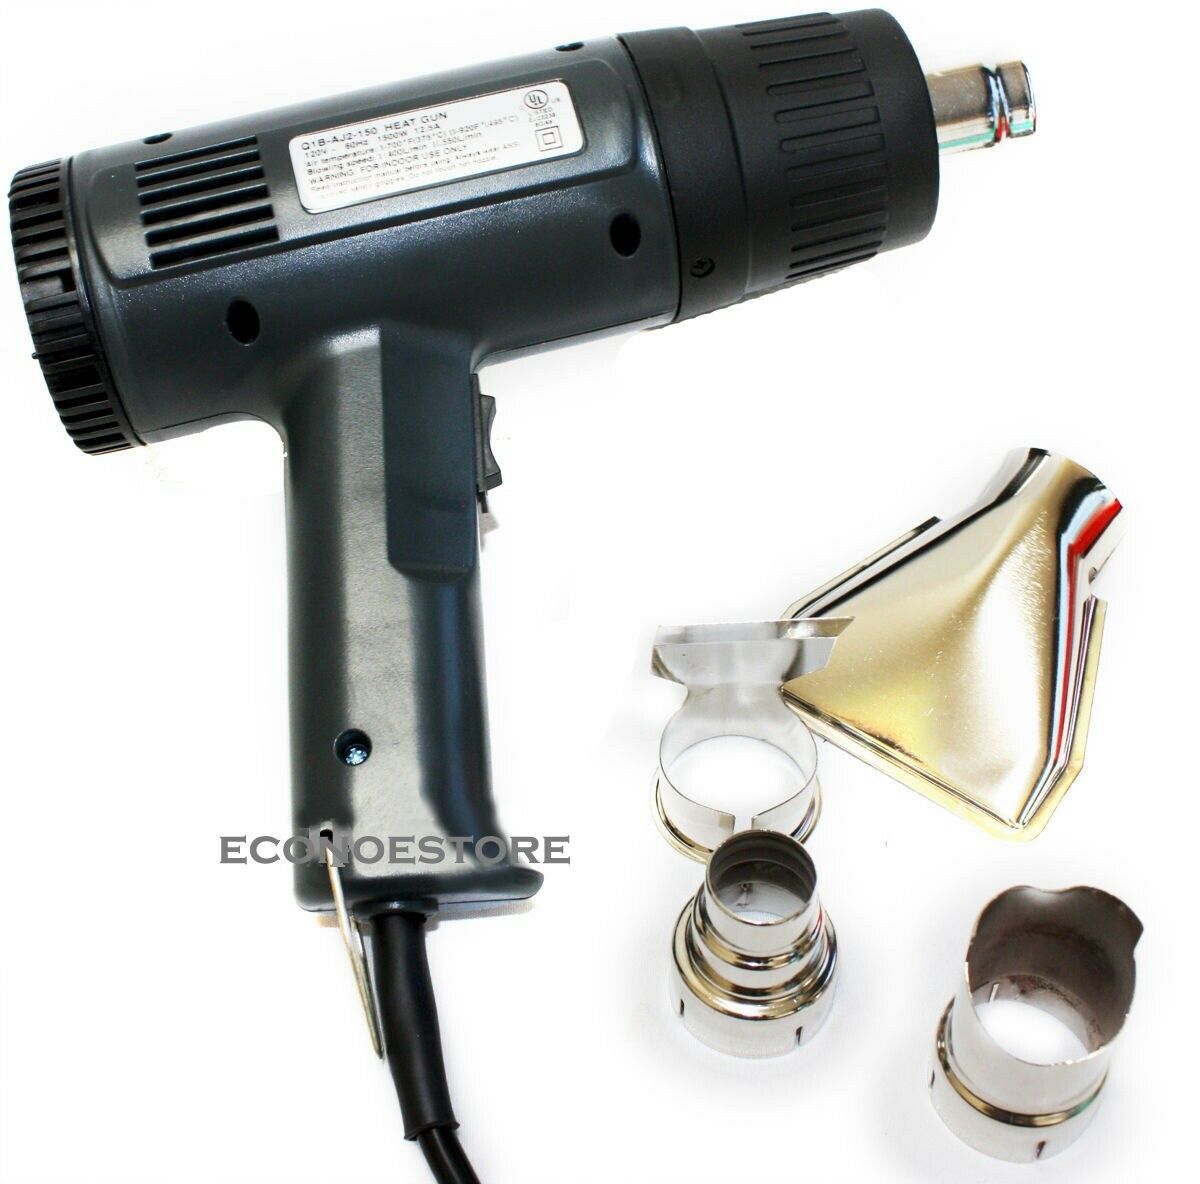 1500W PRO HEAT GUN W/ ACCESSORIES SHRINK WRAPPING 4 NOZZLES ...